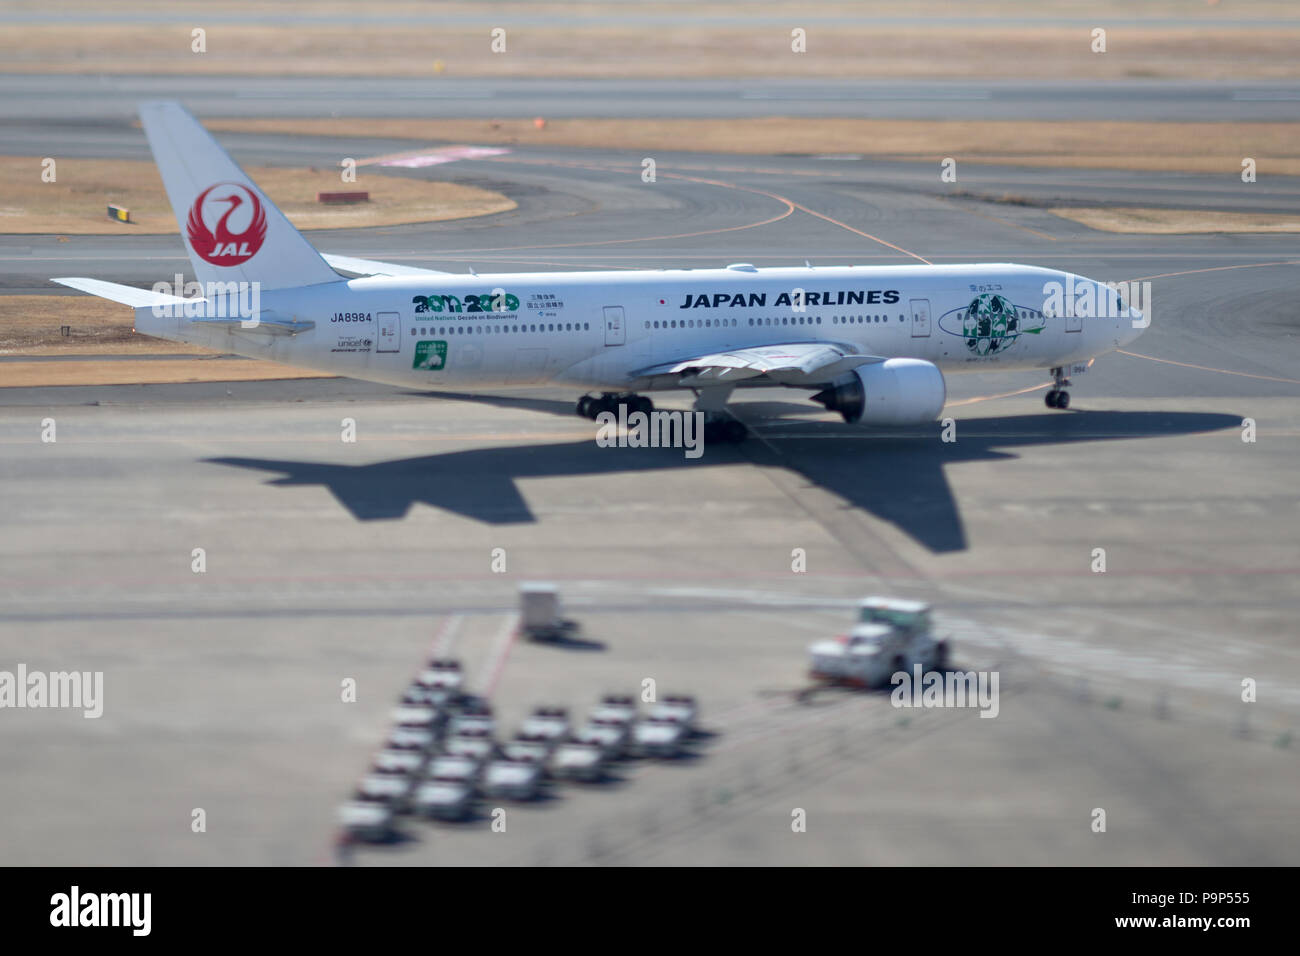 The Boeing 777-200 of JAL - Japan Airlines on the ramp of Haneda airport, Tokyo, Japan. Stock Photo